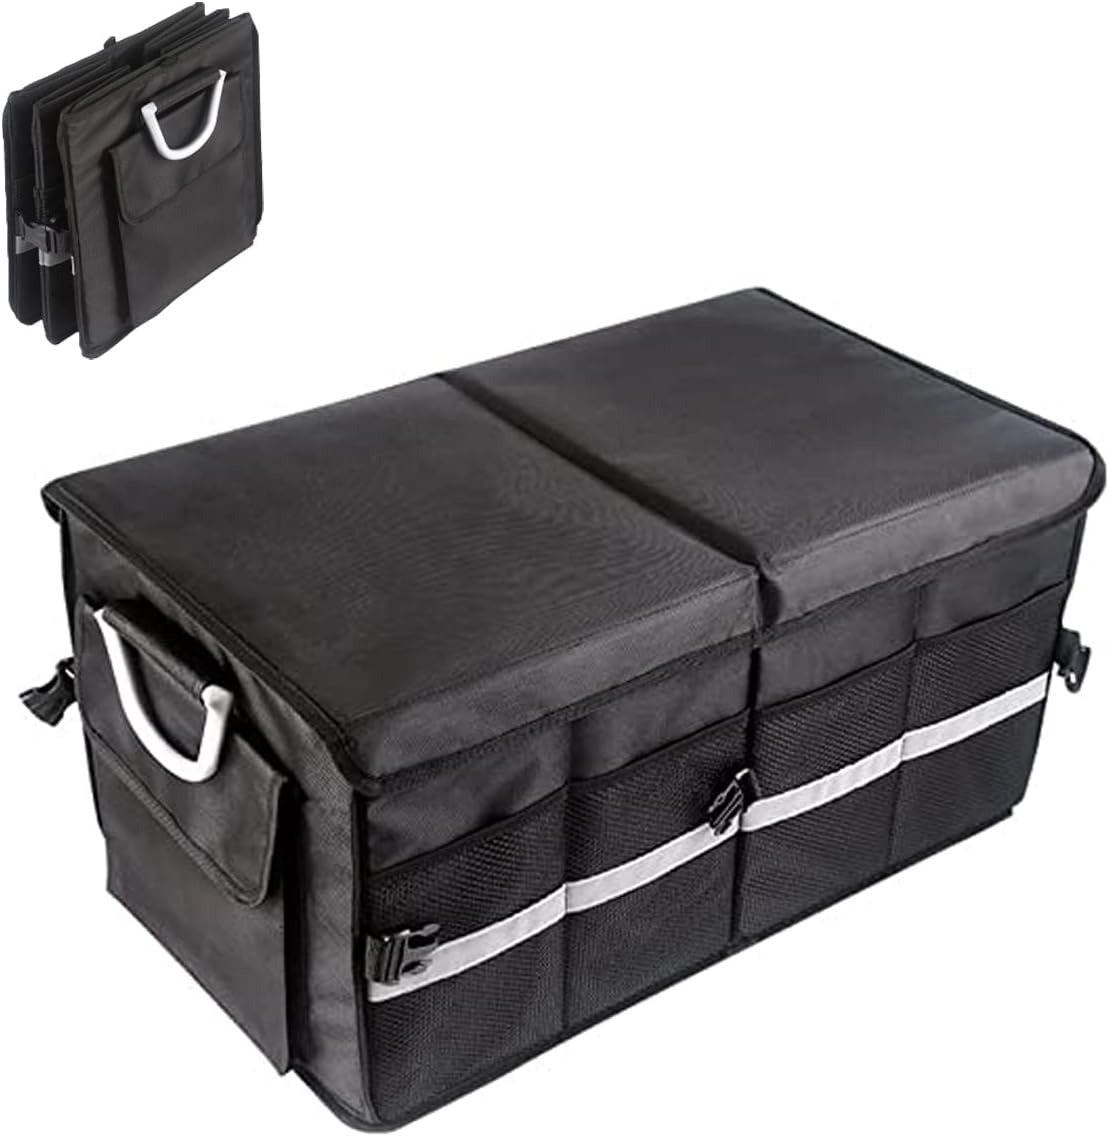 Large capacity car boot organizer with compartments